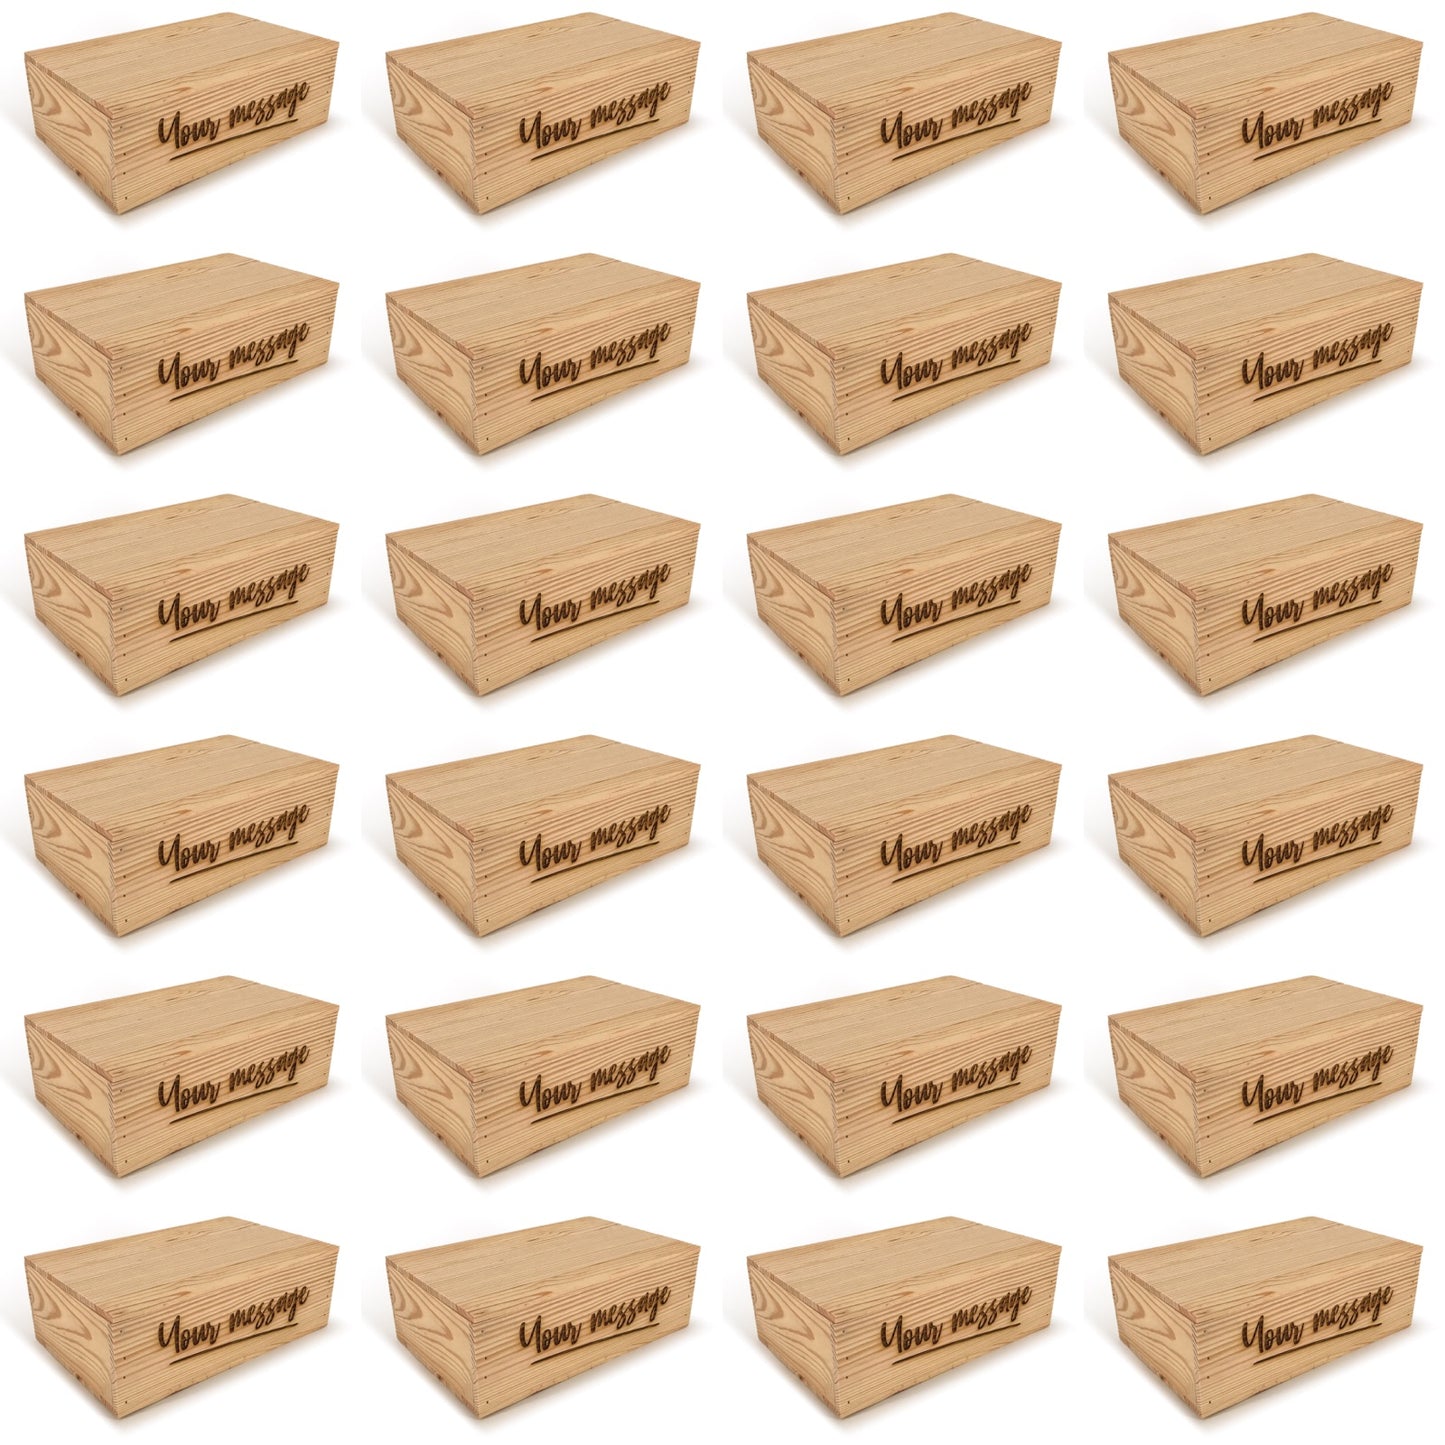 24 Two Bottle Wine Crate Boxes with Lid and Custom Message 14x9x4.5, 6-WB-14-9-4.5-ST-NW-LL,  12-WB-14-9-4.5-ST-NW-LL,  24-WB-14-9-4.5-ST-NW-LL,  48-WB-14-9-4.5-ST-NW-LL,  96-WB-14-9-4.5-ST-NW-LL